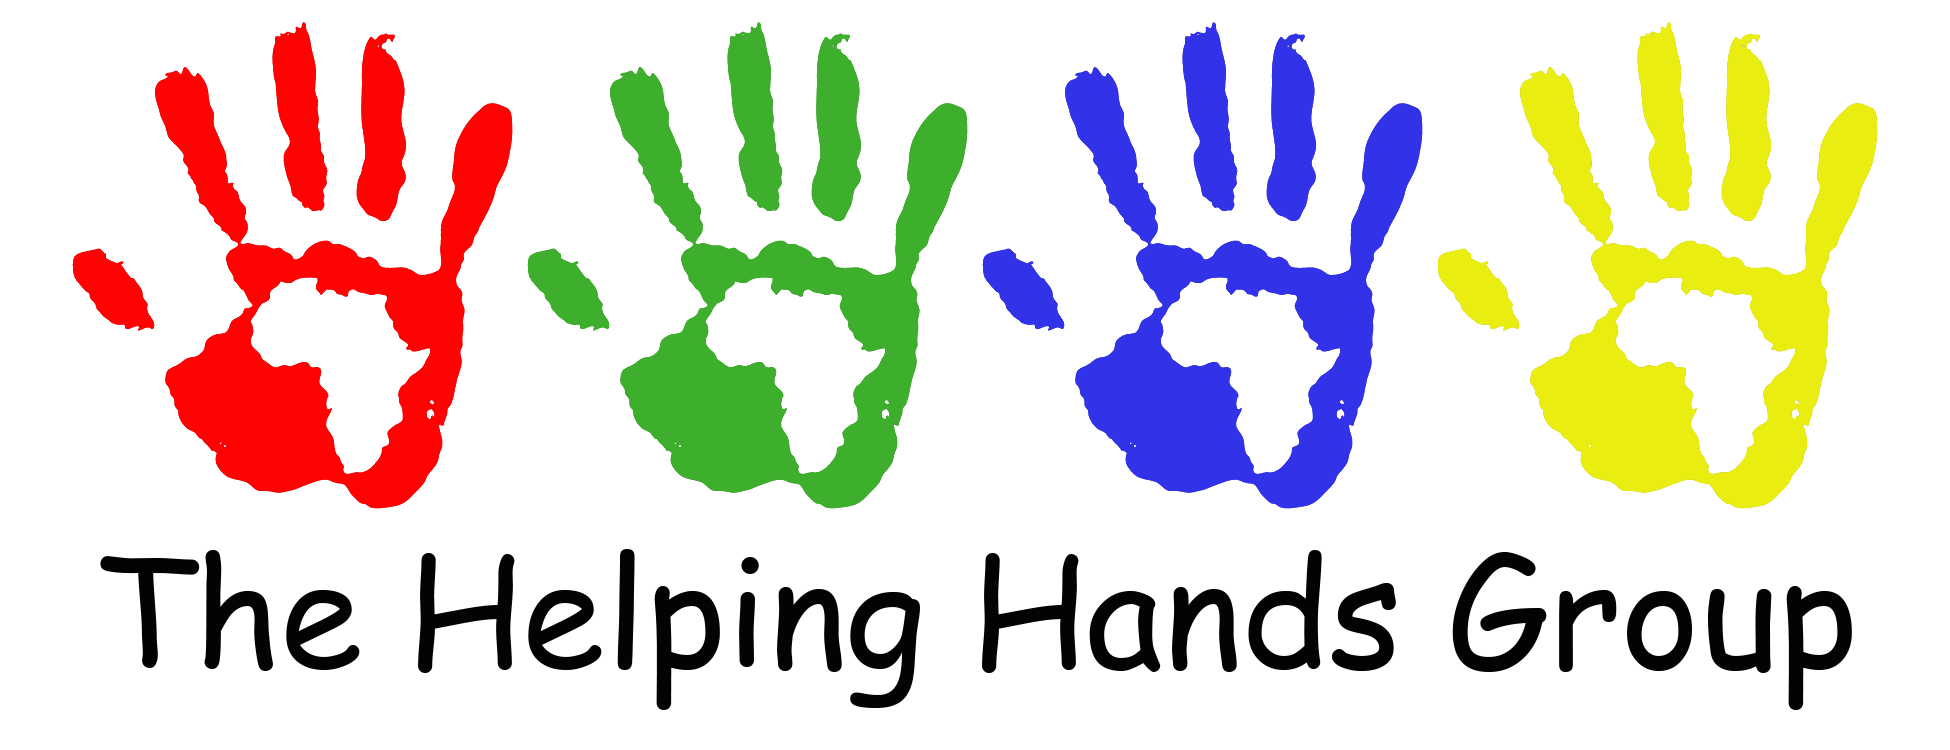 Colored Hands Logo - Donate. The Helping Hands Group